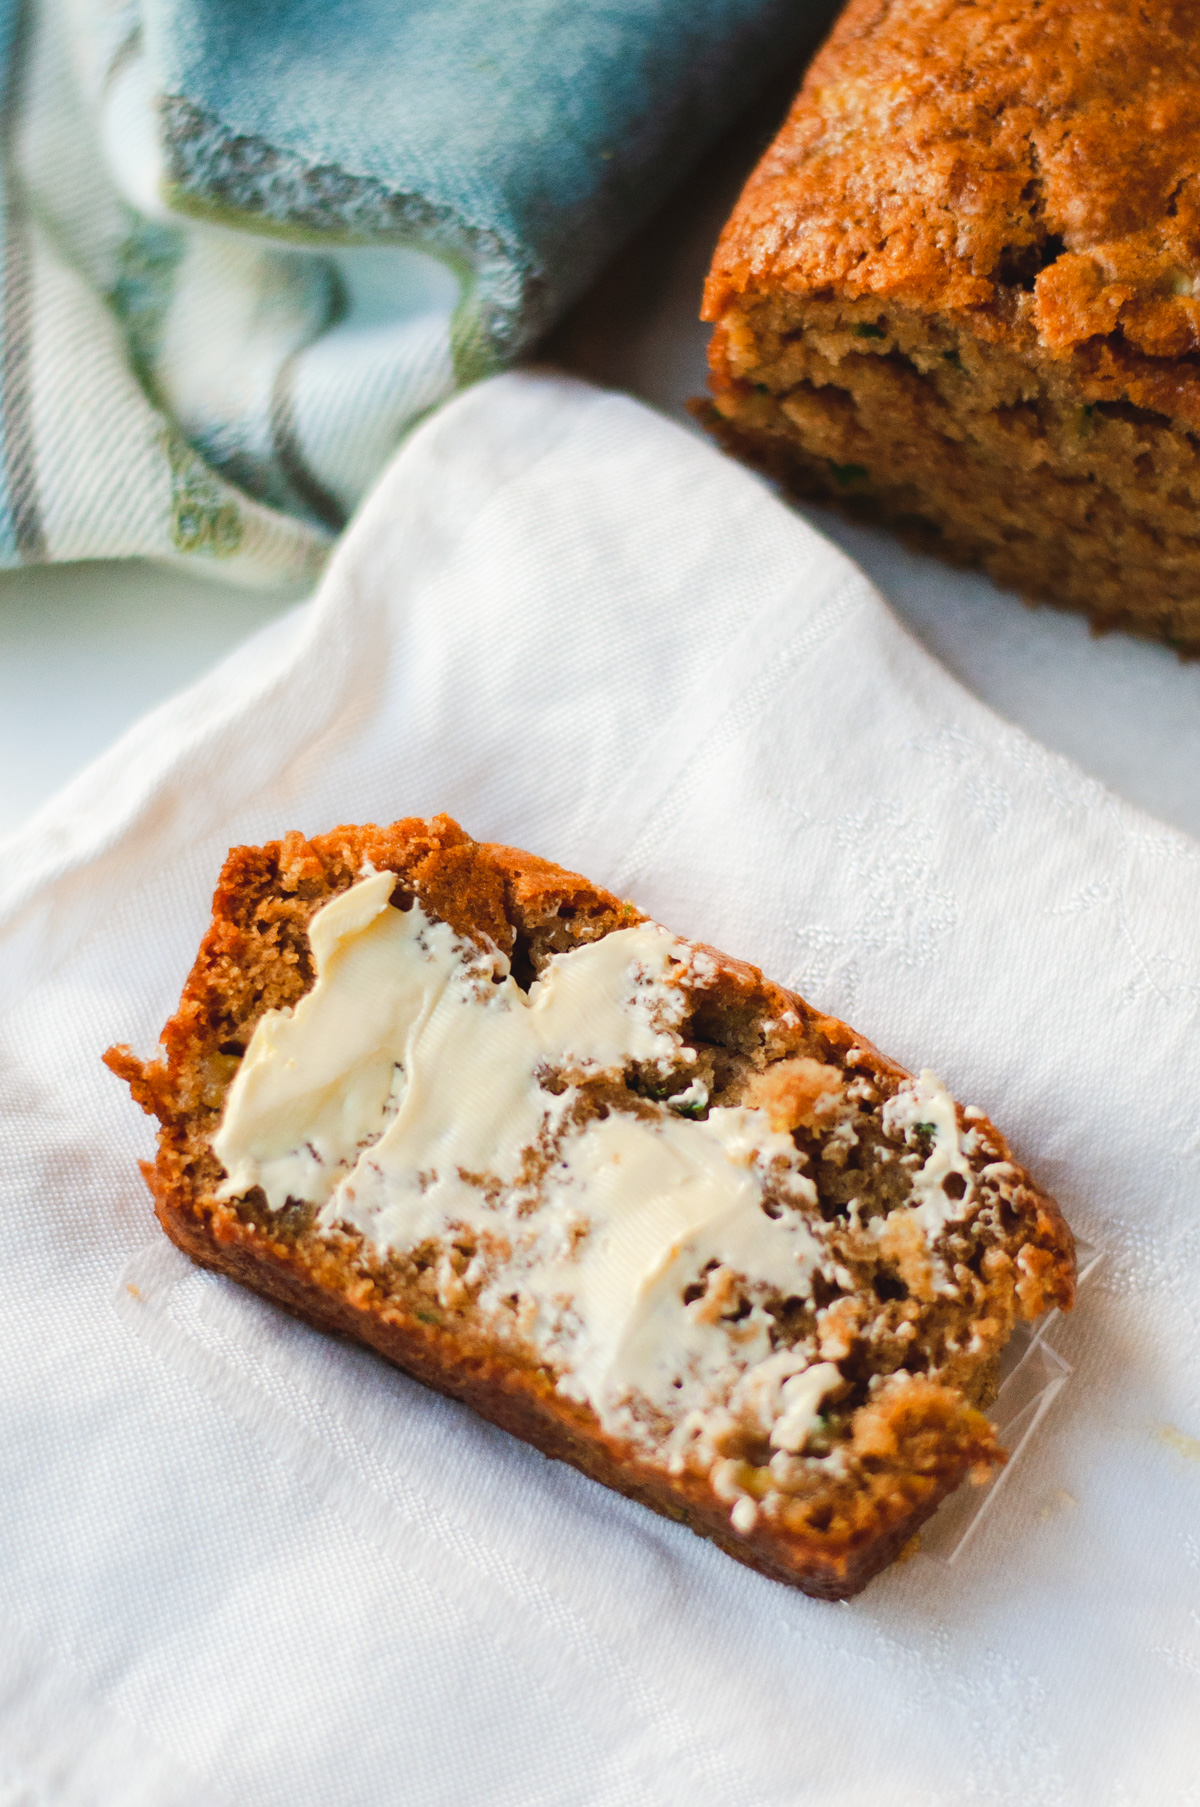 Slice of zucchini bread with butter.